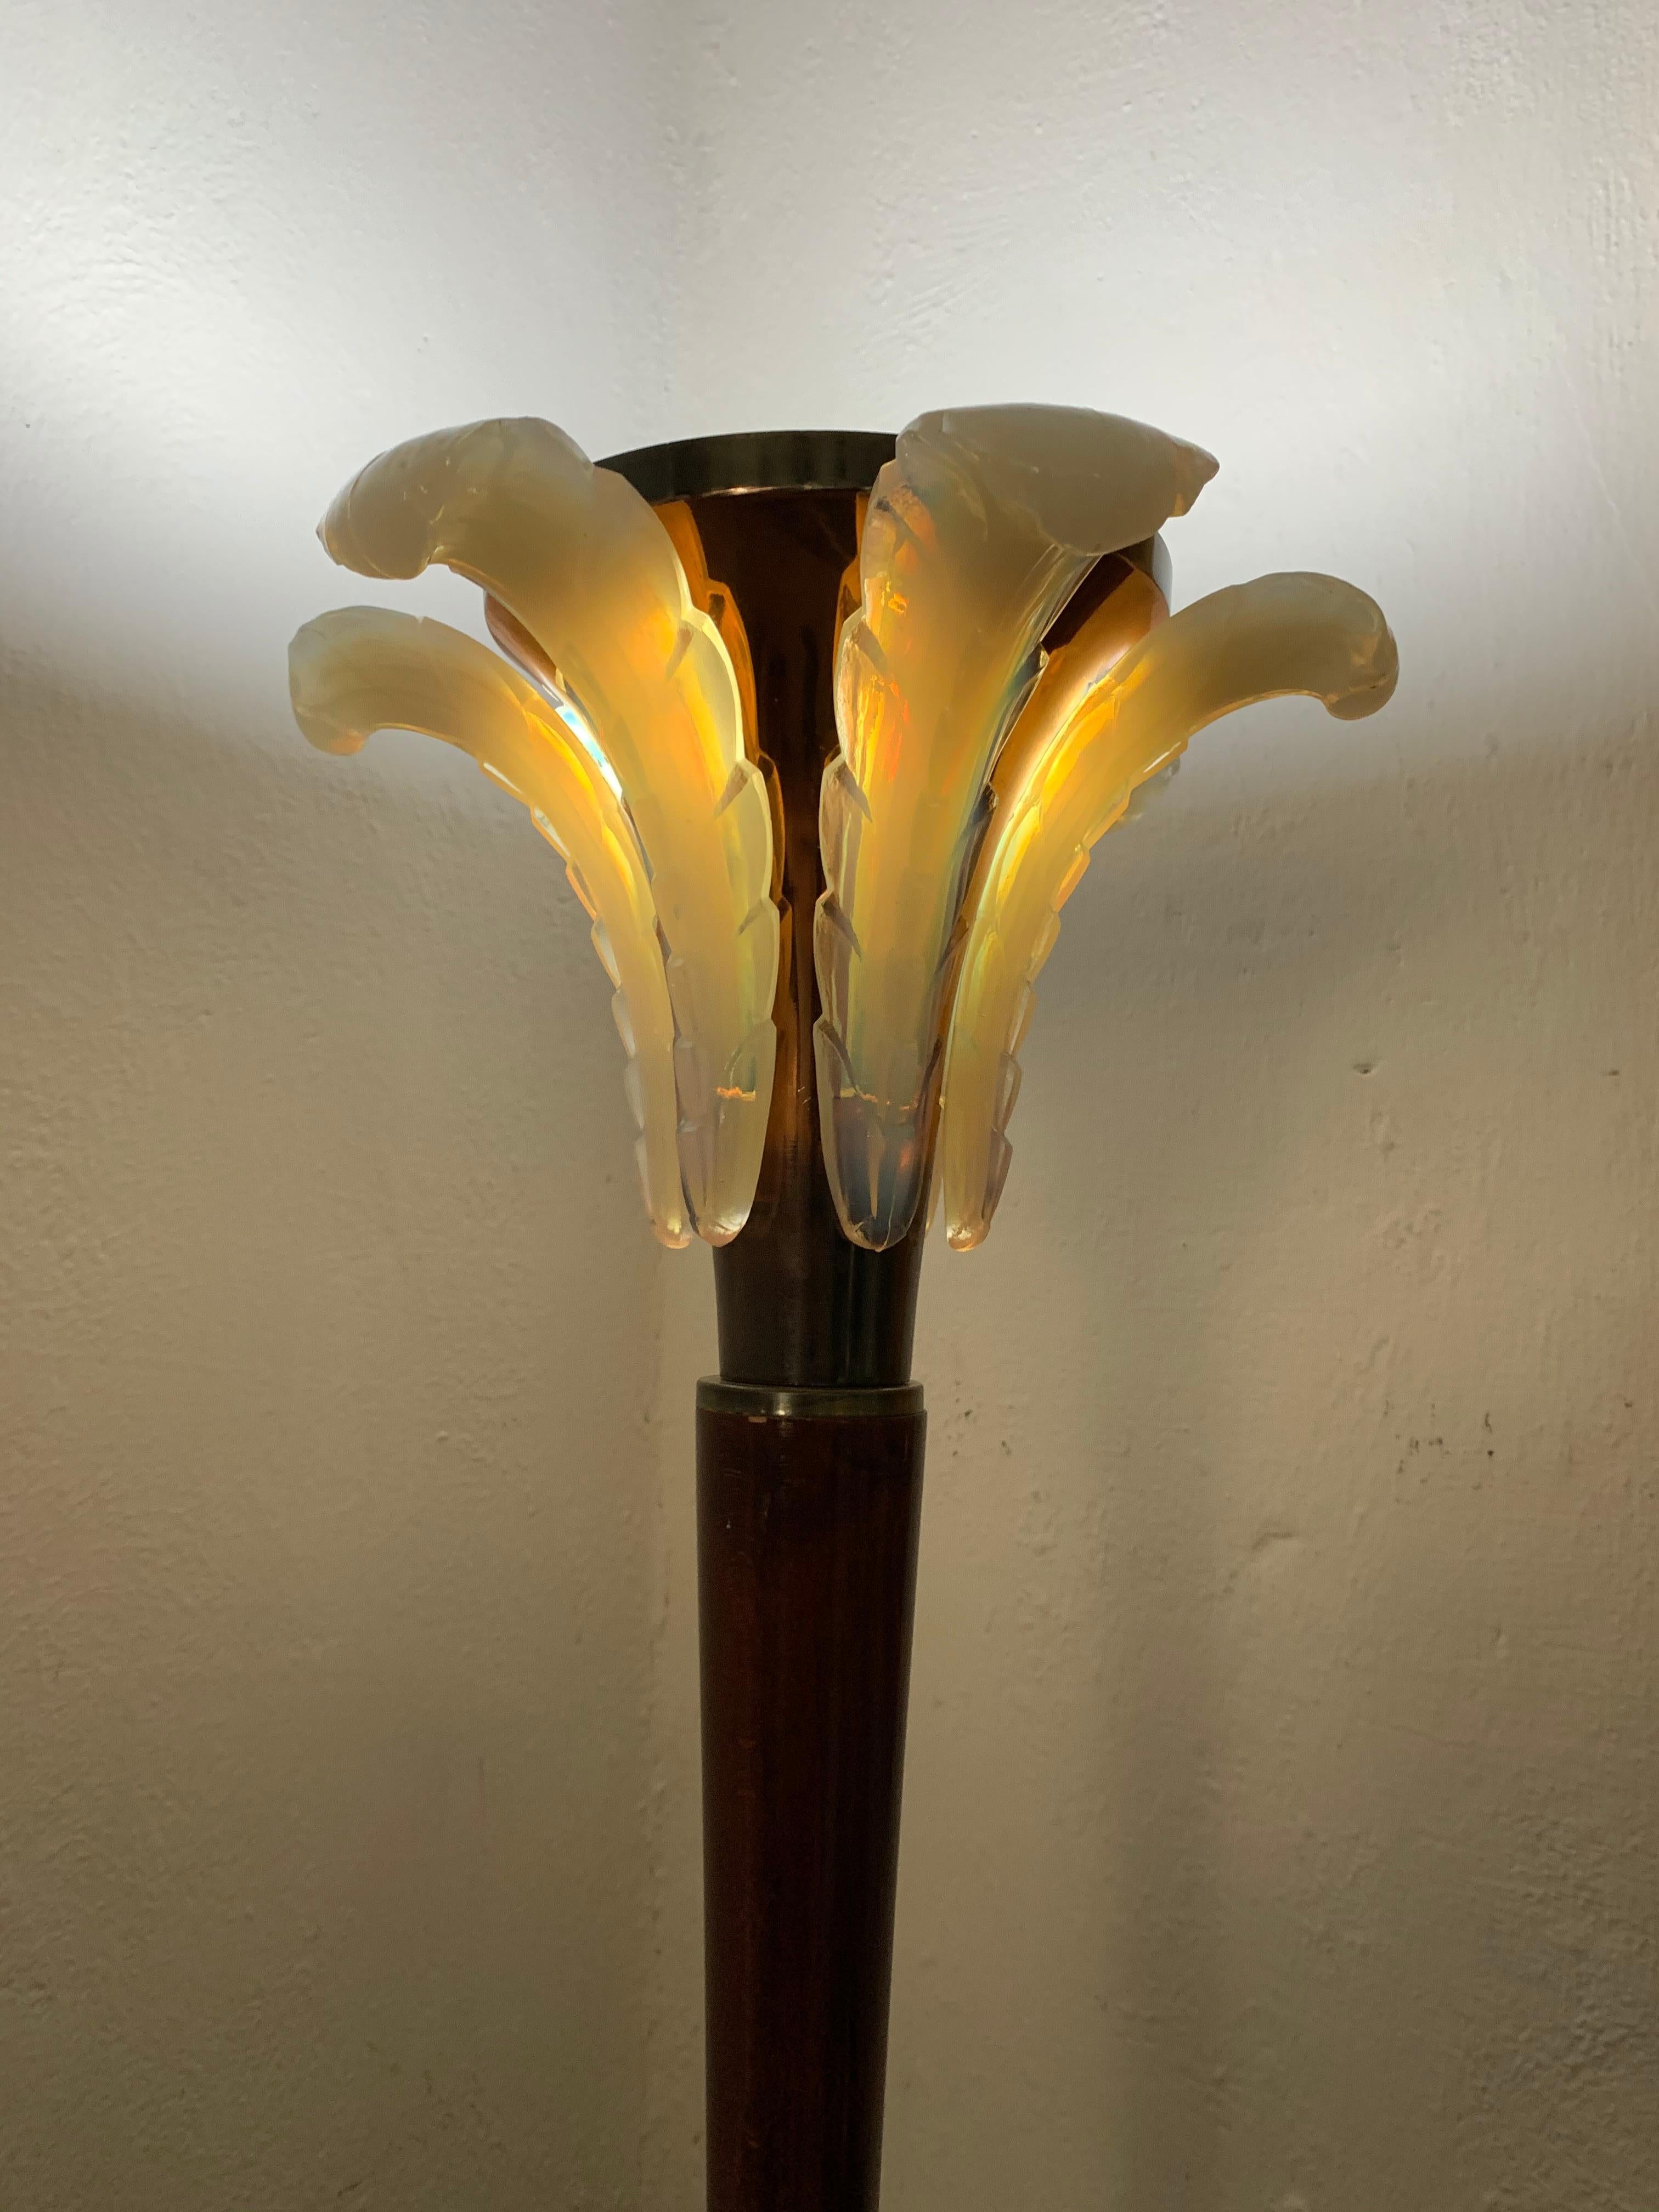 French Art Deco Table Lamp Attributed to Petitot, Glass Signed EZAN, France circa 1940s